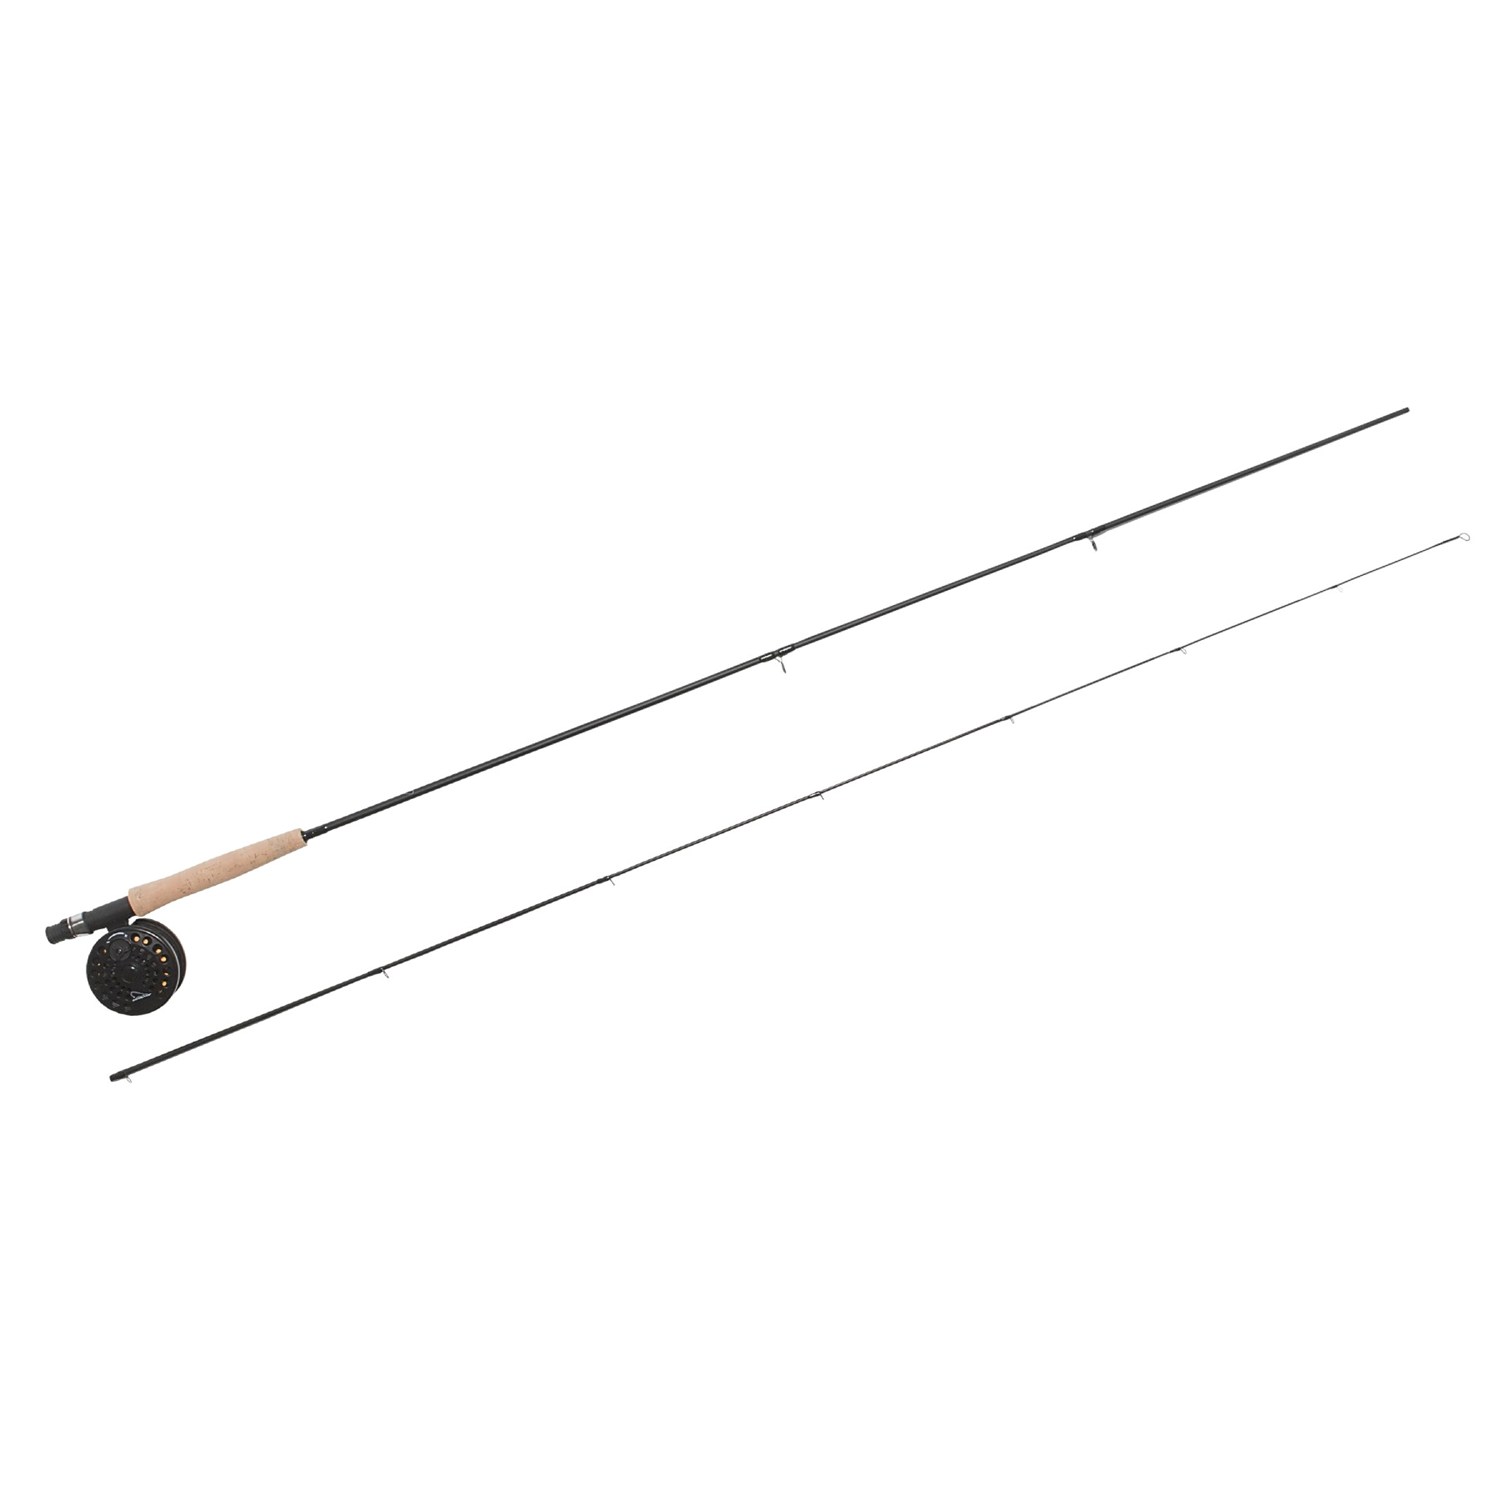 Fly Fishing Rod And Reel Combo Images  Pictures - Becuo